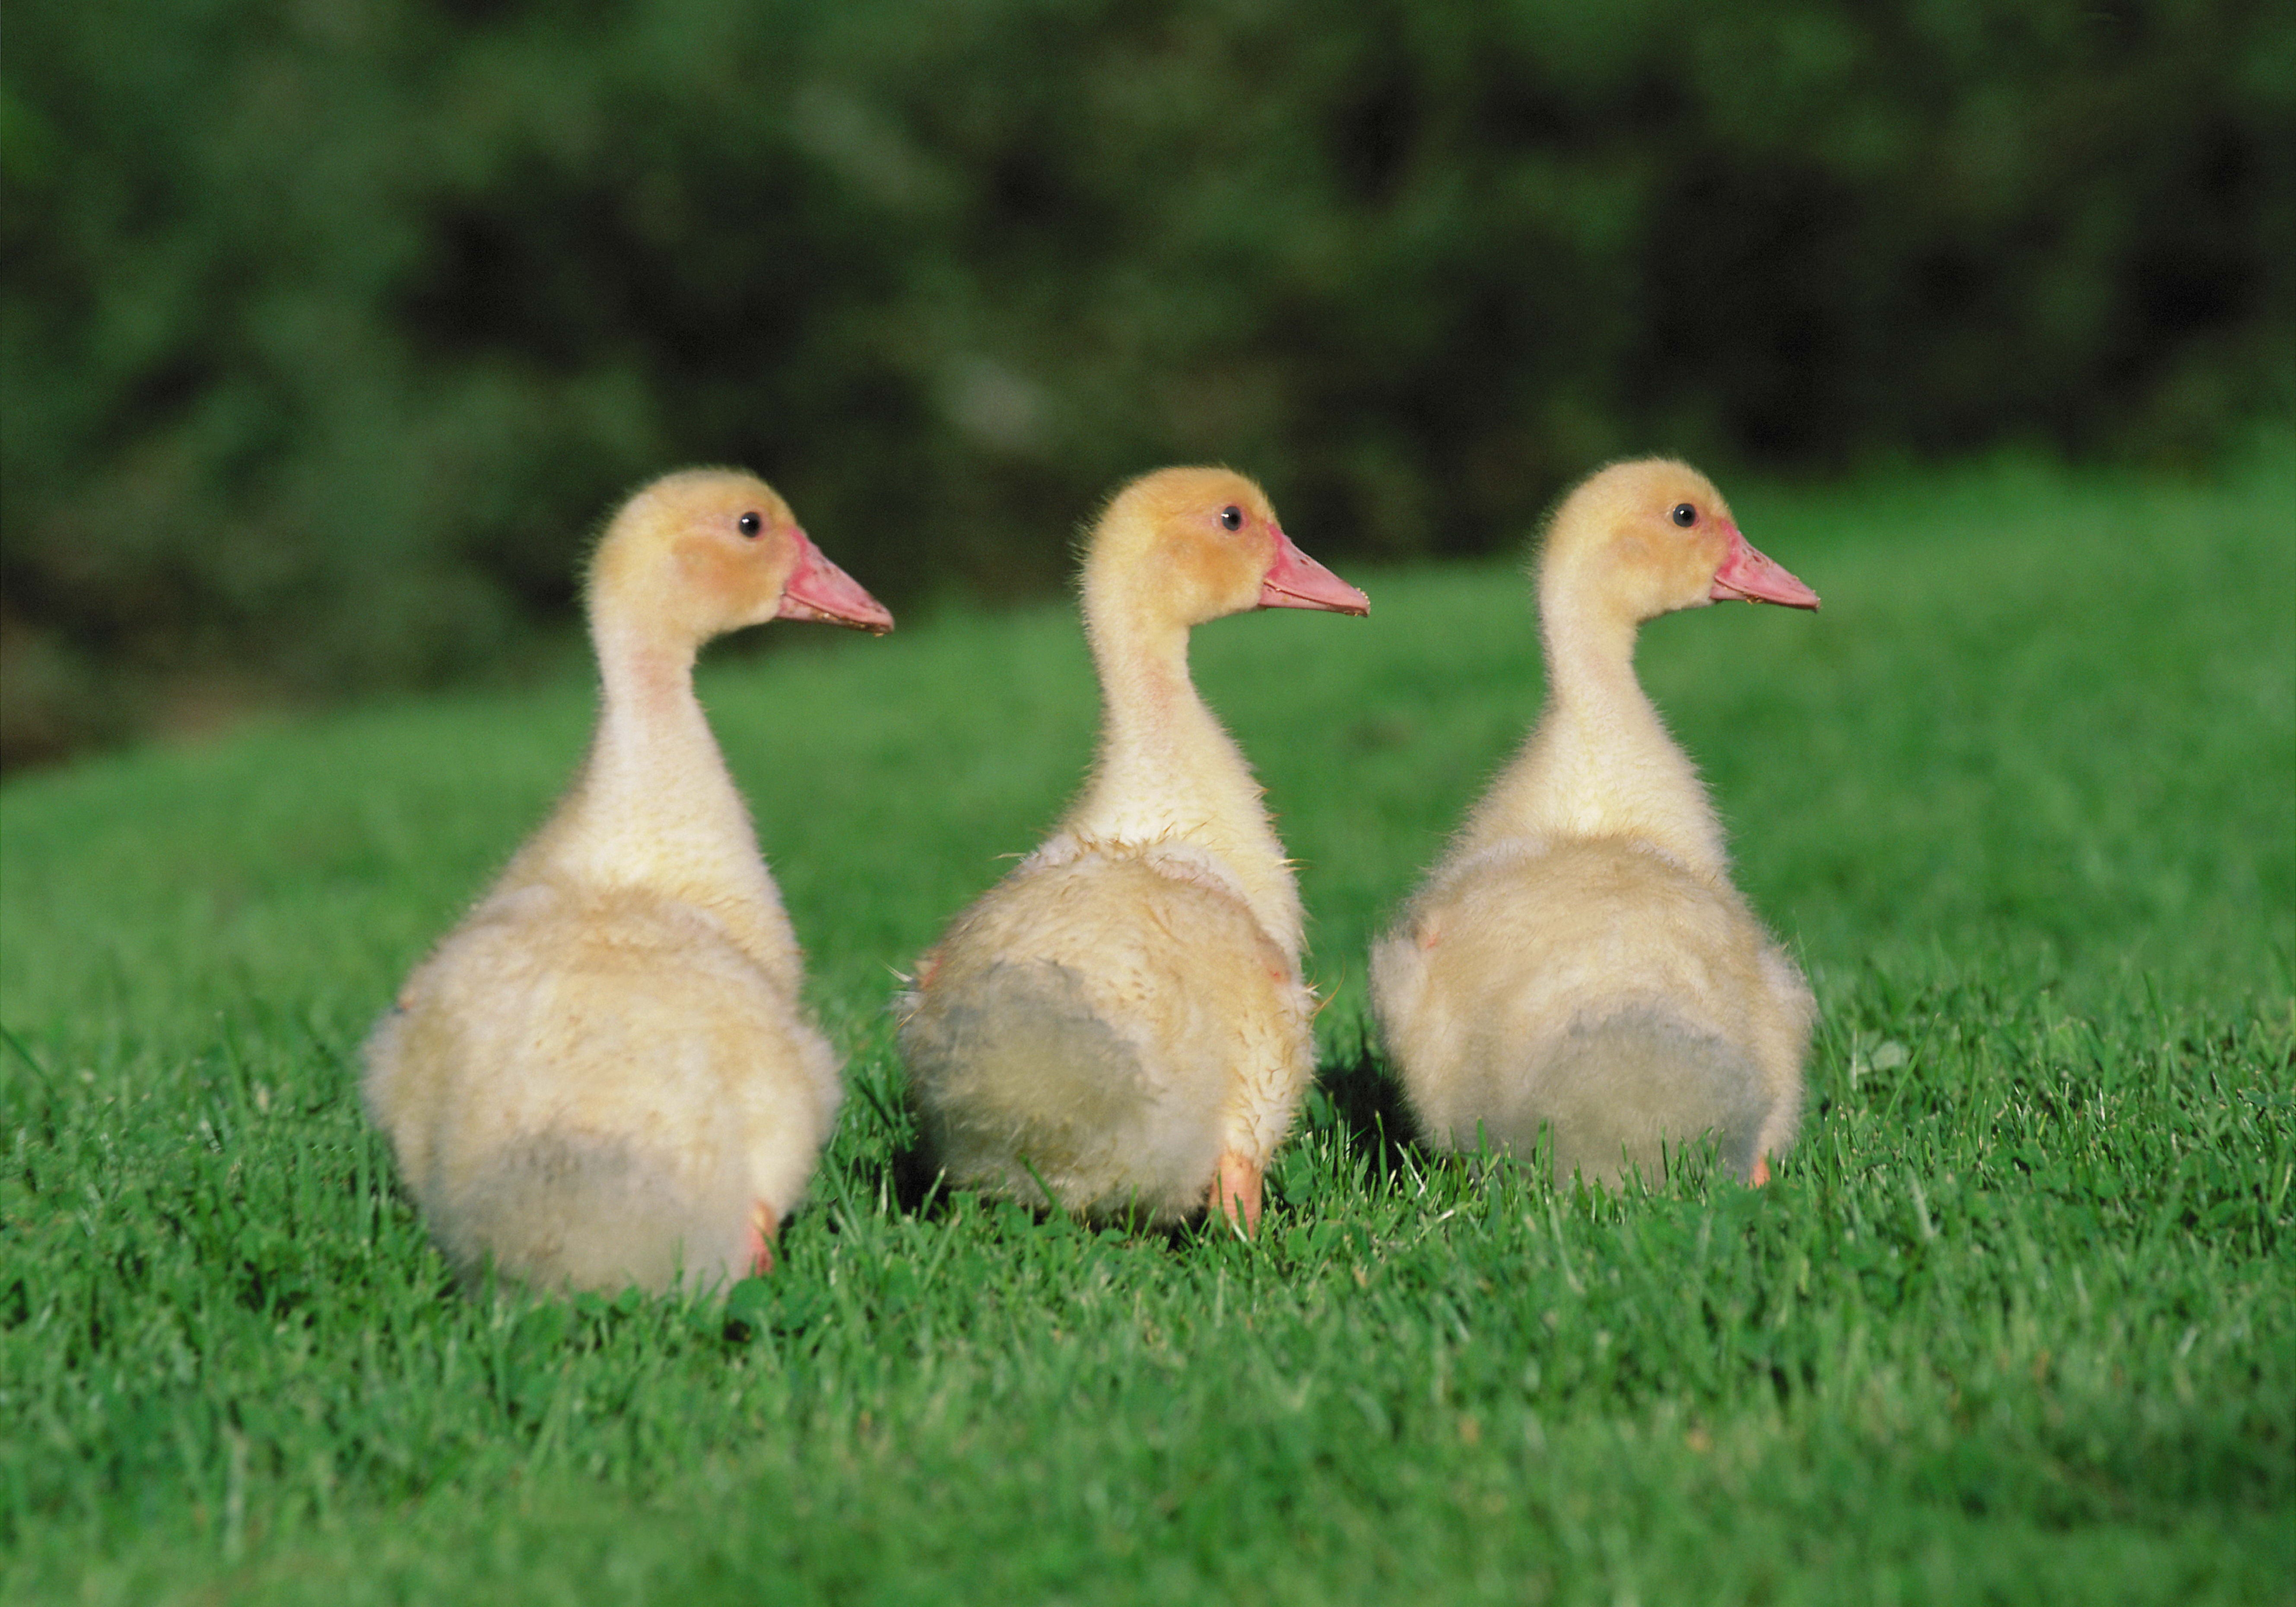 70289 Screensavers and Wallpapers Chicks for phone. Download animals, geese, birds, chicks, goose pictures for free